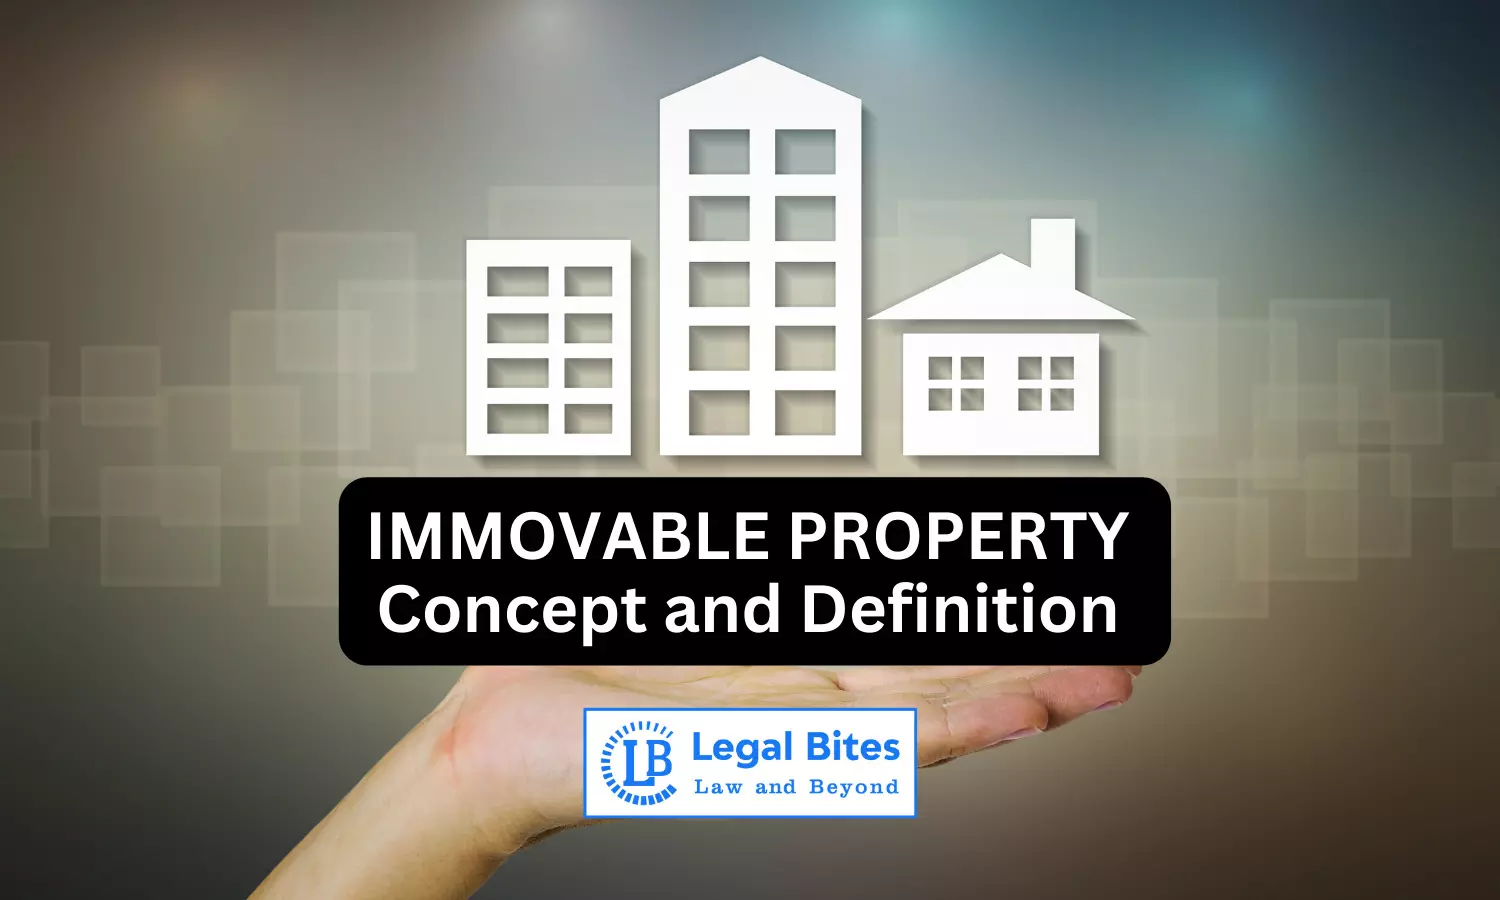 Immovable Property - Concept and Definition